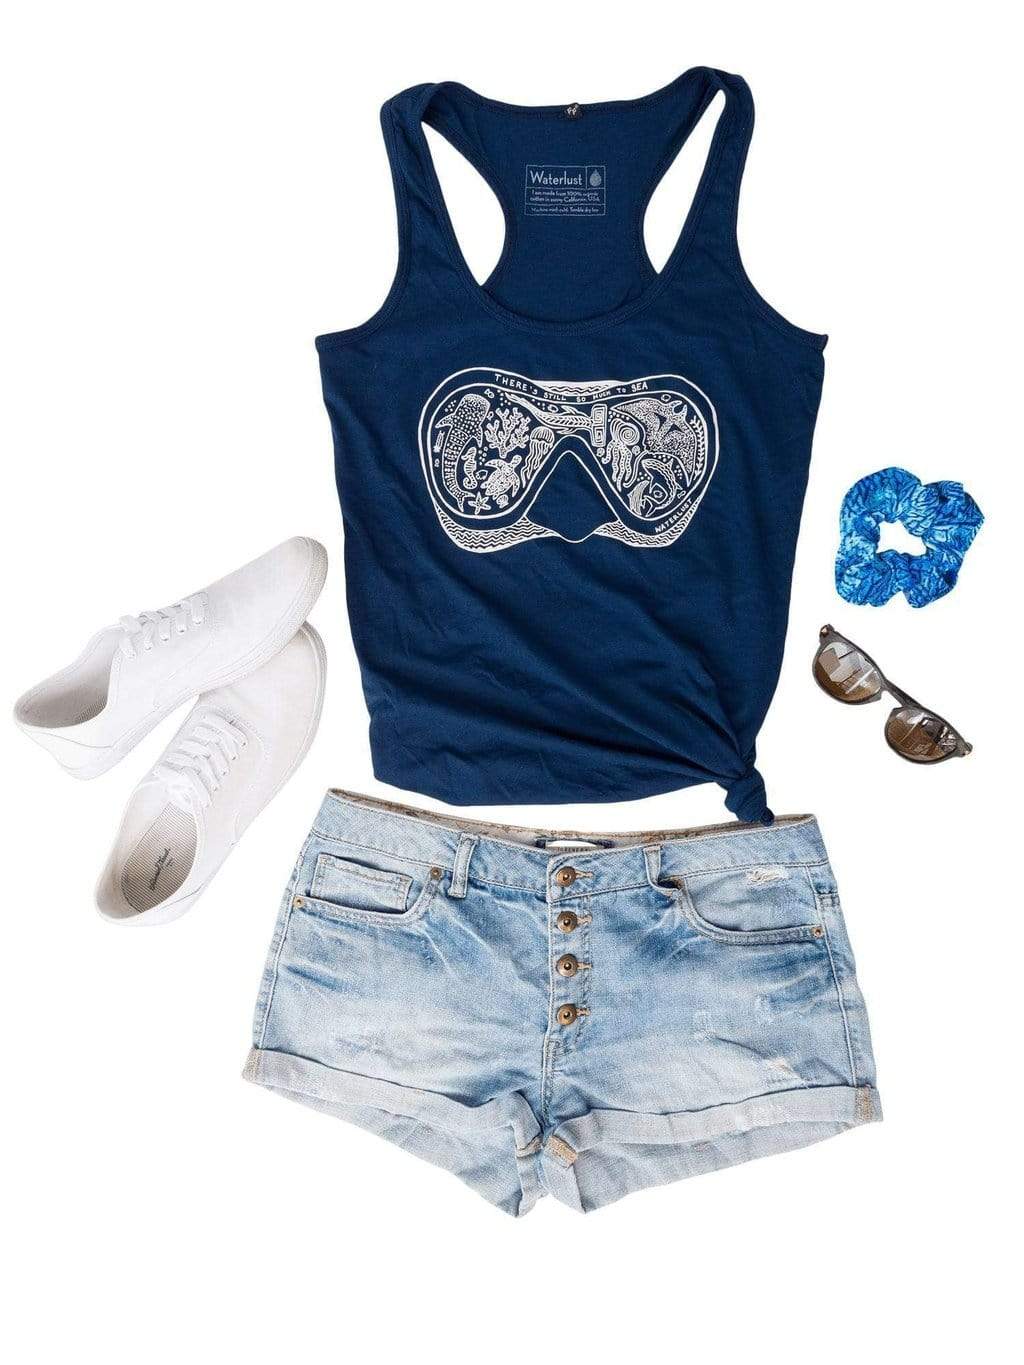 Waterlust &quot;There&#39;s Still So Much To Sea&quot; 100% Organic Cotton Tank Top flat off body view styled with shorts, shoes, sunglasses and a scrunchie